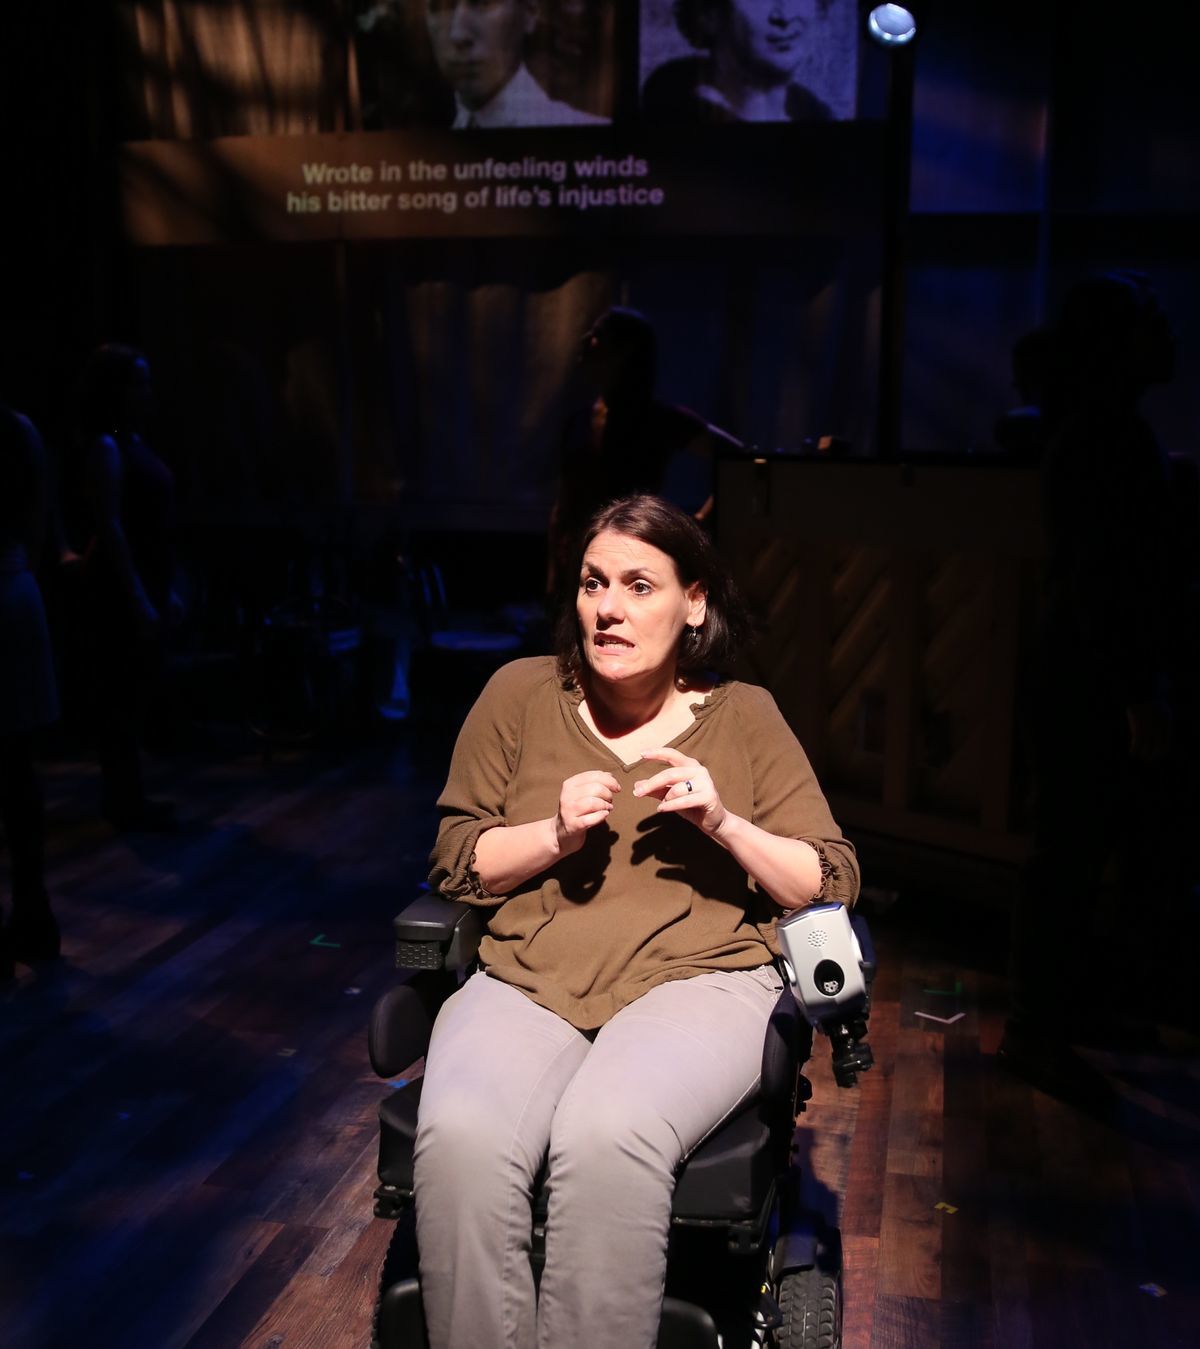 A picture of Ann Marie who’s sitting in her power wheelchair and wearing a green olive shirt and beige pants. She has a spotlight on her and she looks like she is perplexed.